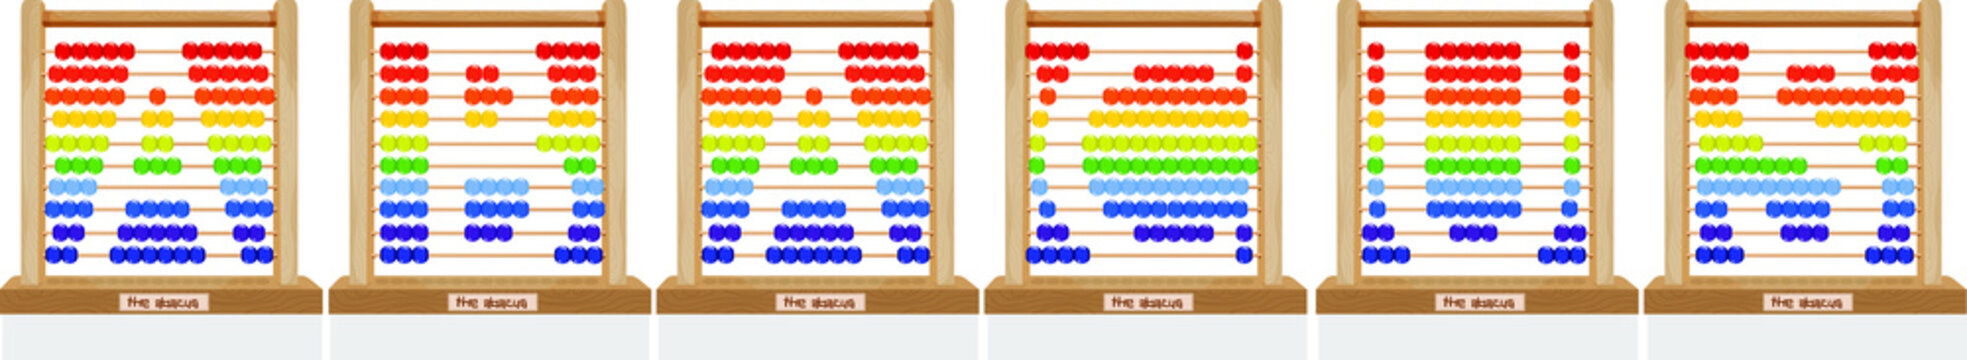 abacus, consisting of letters of the alphabet